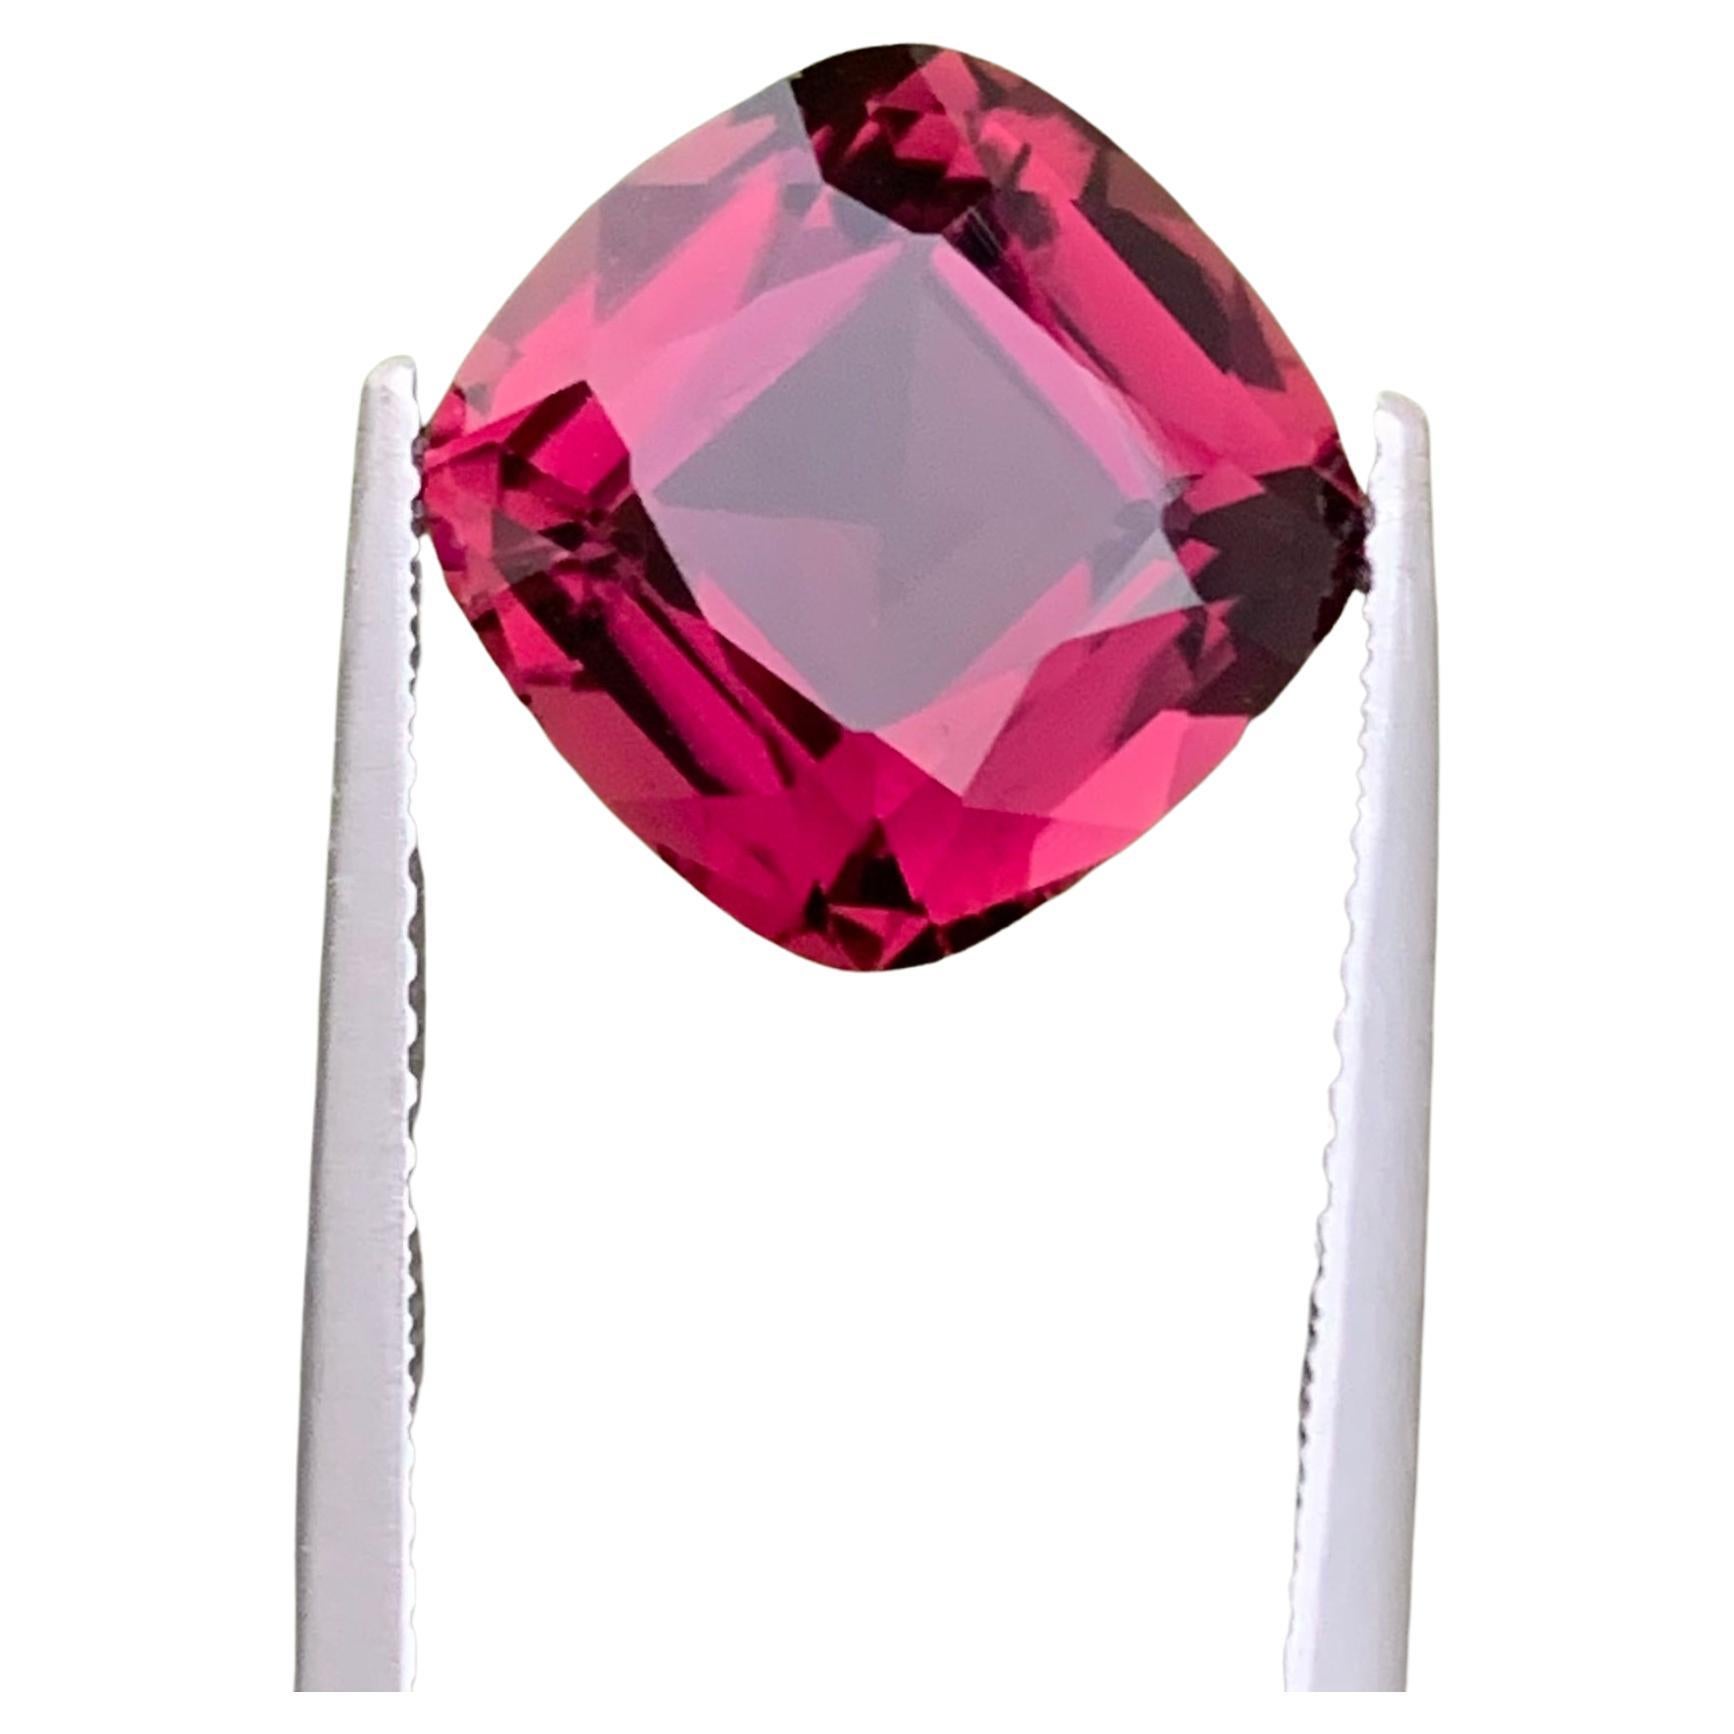 5.30 Cts Natural Loose Rubellite Tourmaline Ring Gem From Afghanistan Mine For Sale